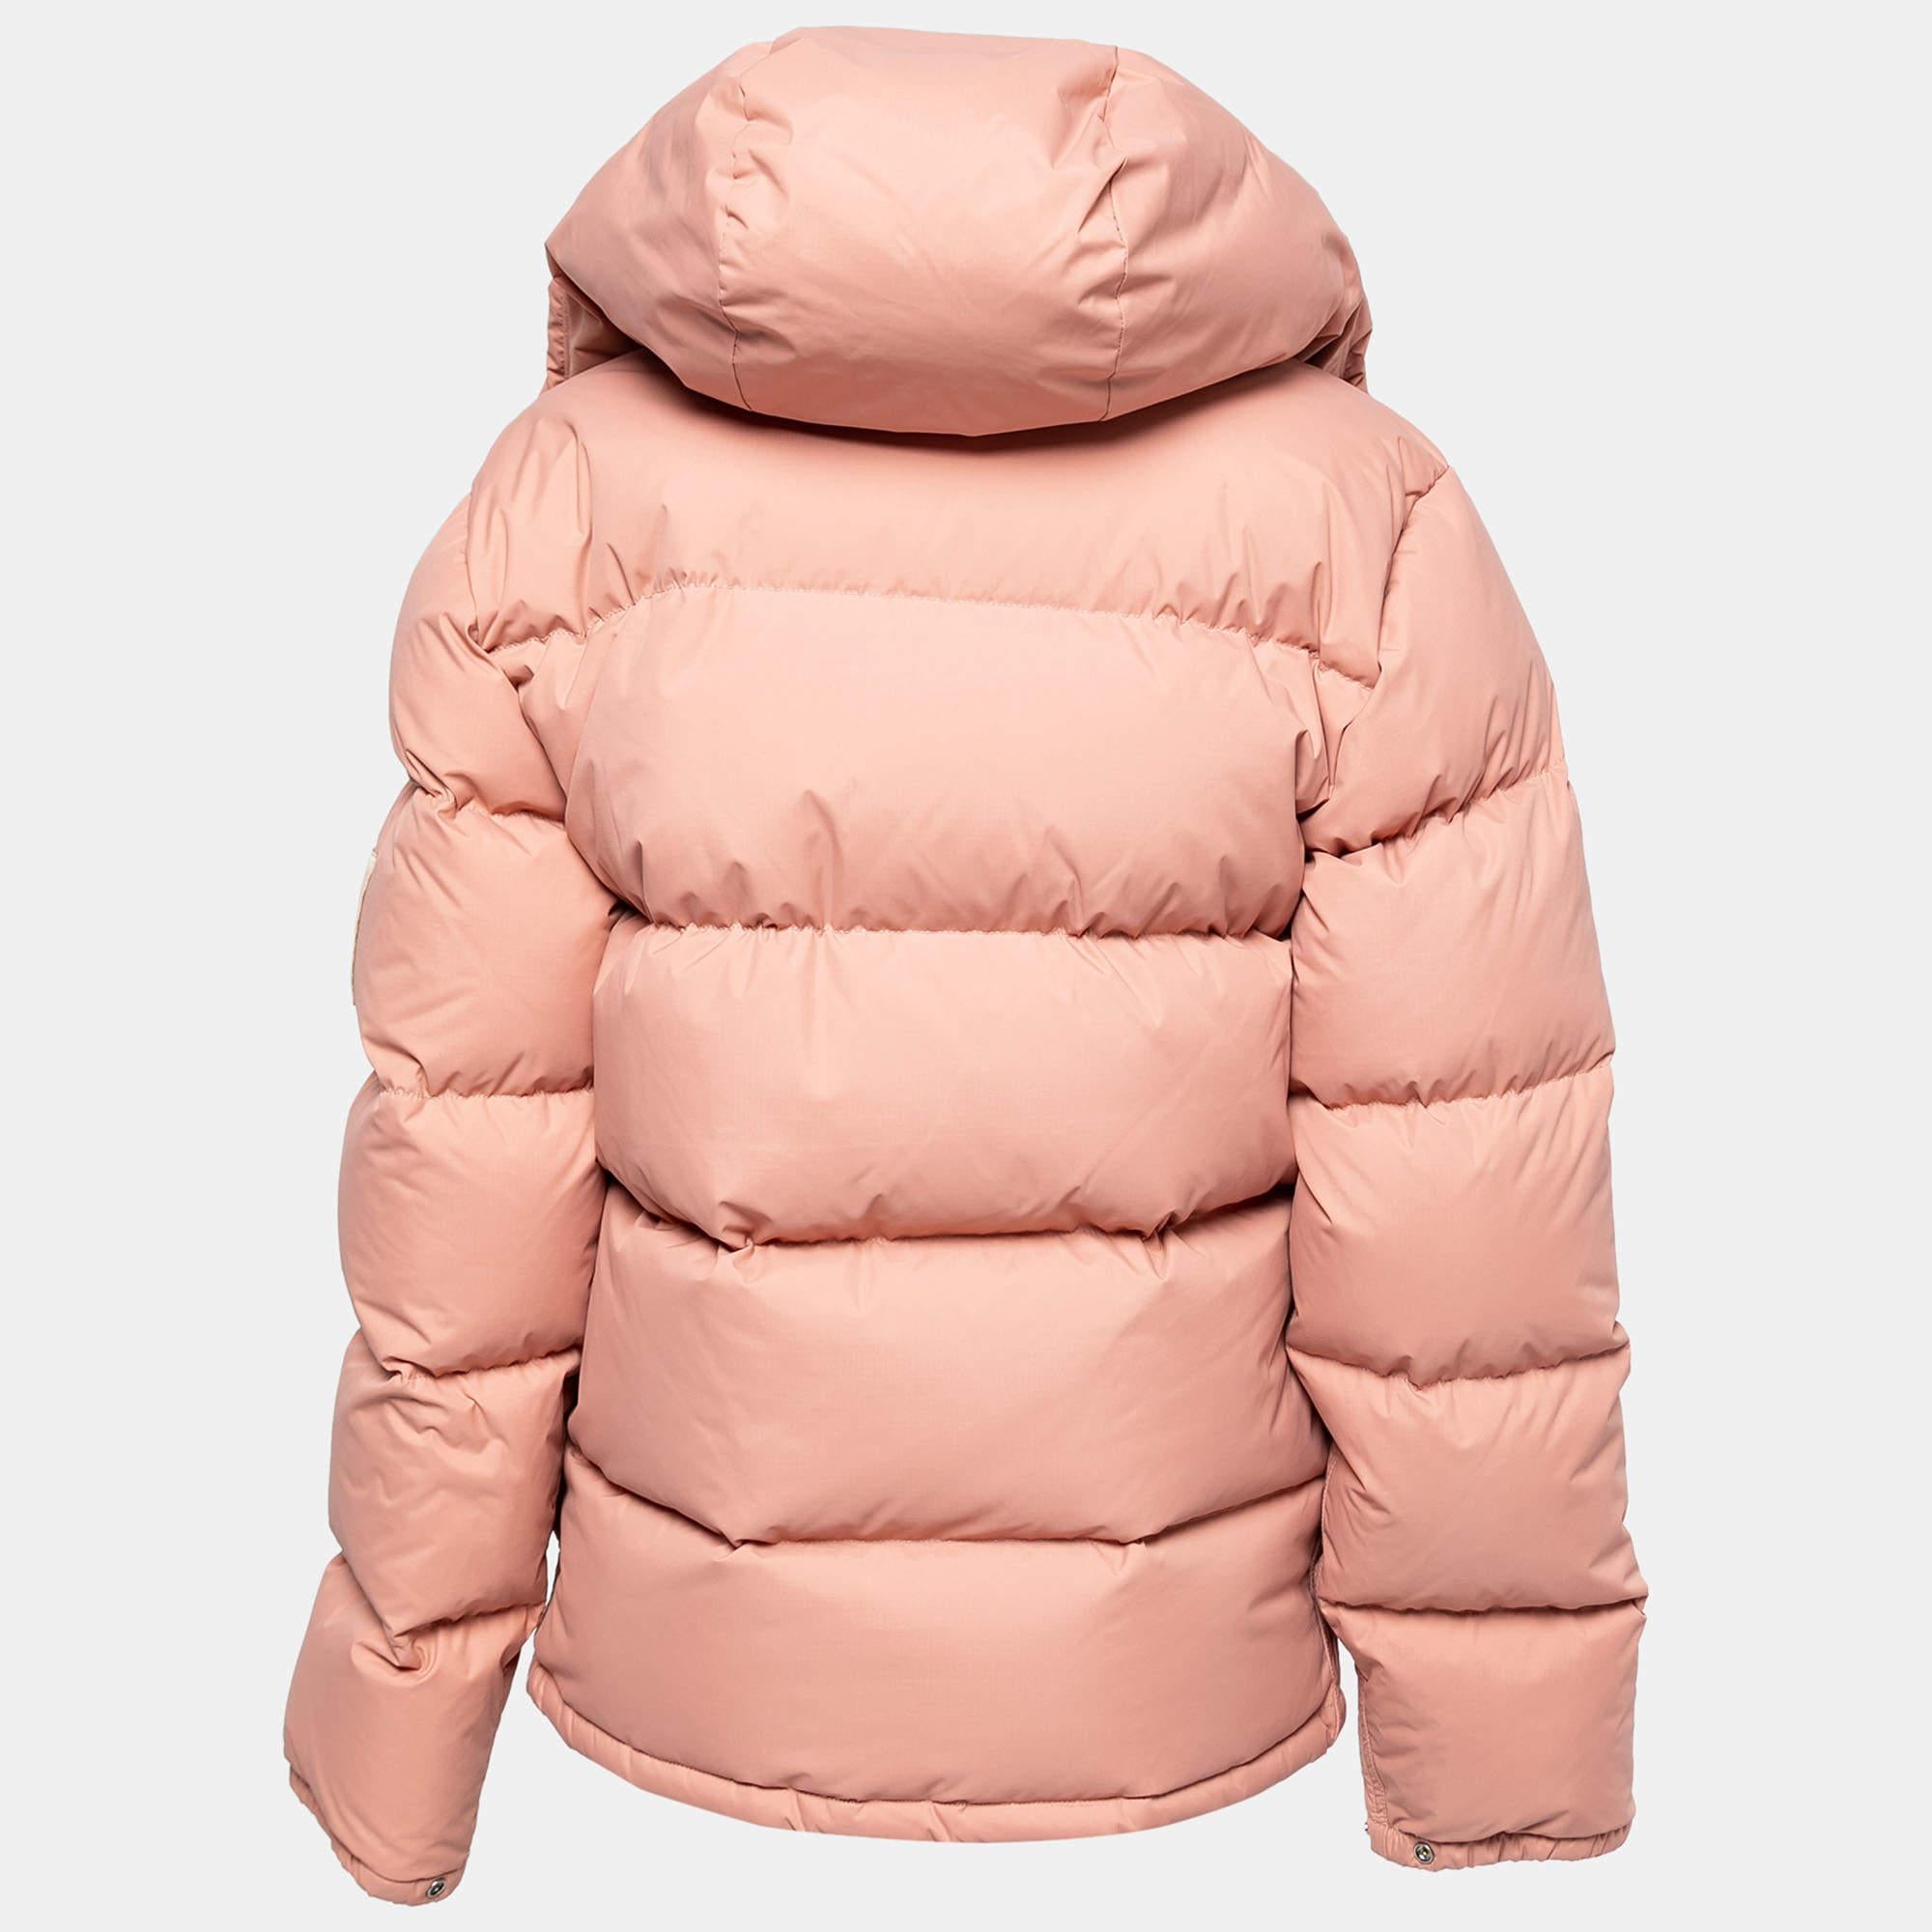 North Face X Gucci Light Pink Down Jacket S In Excellent Condition For Sale In Dubai, Al Qouz 2